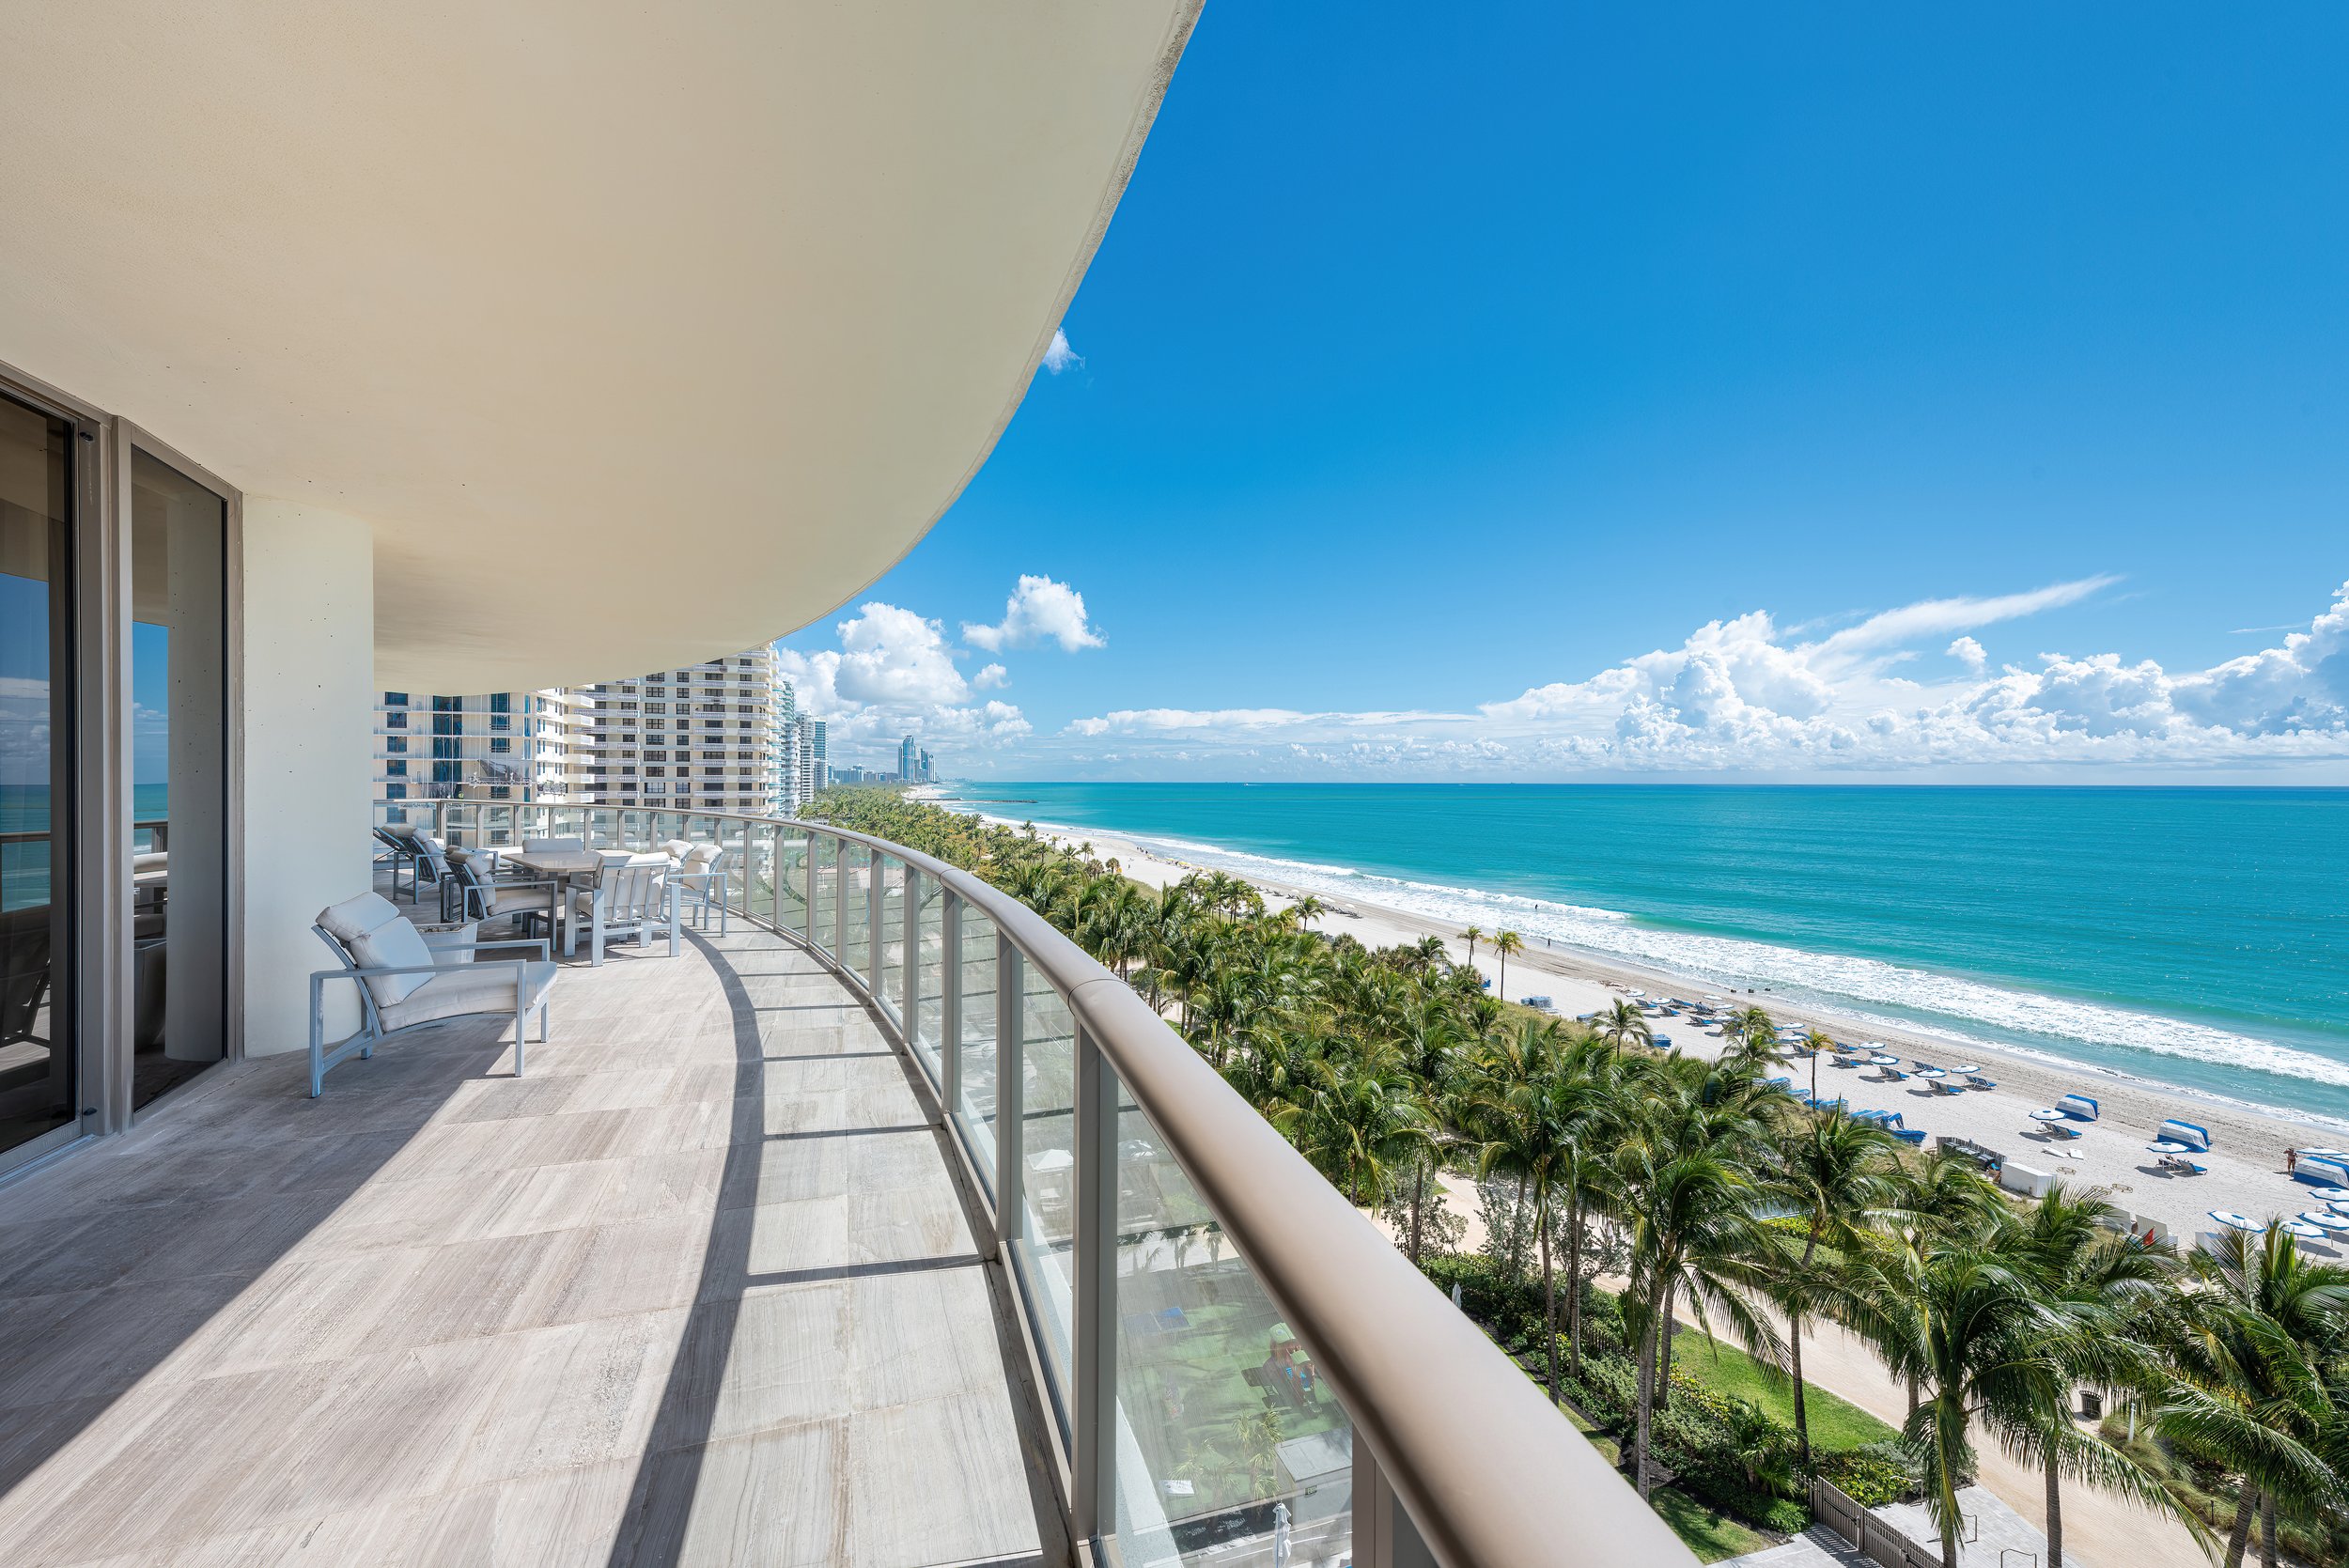 Master Brokers Forum Listing: See The Views From This Beachfront Condo In St. Regis Bal Harbour Asking $10.995 Million 1.JPG